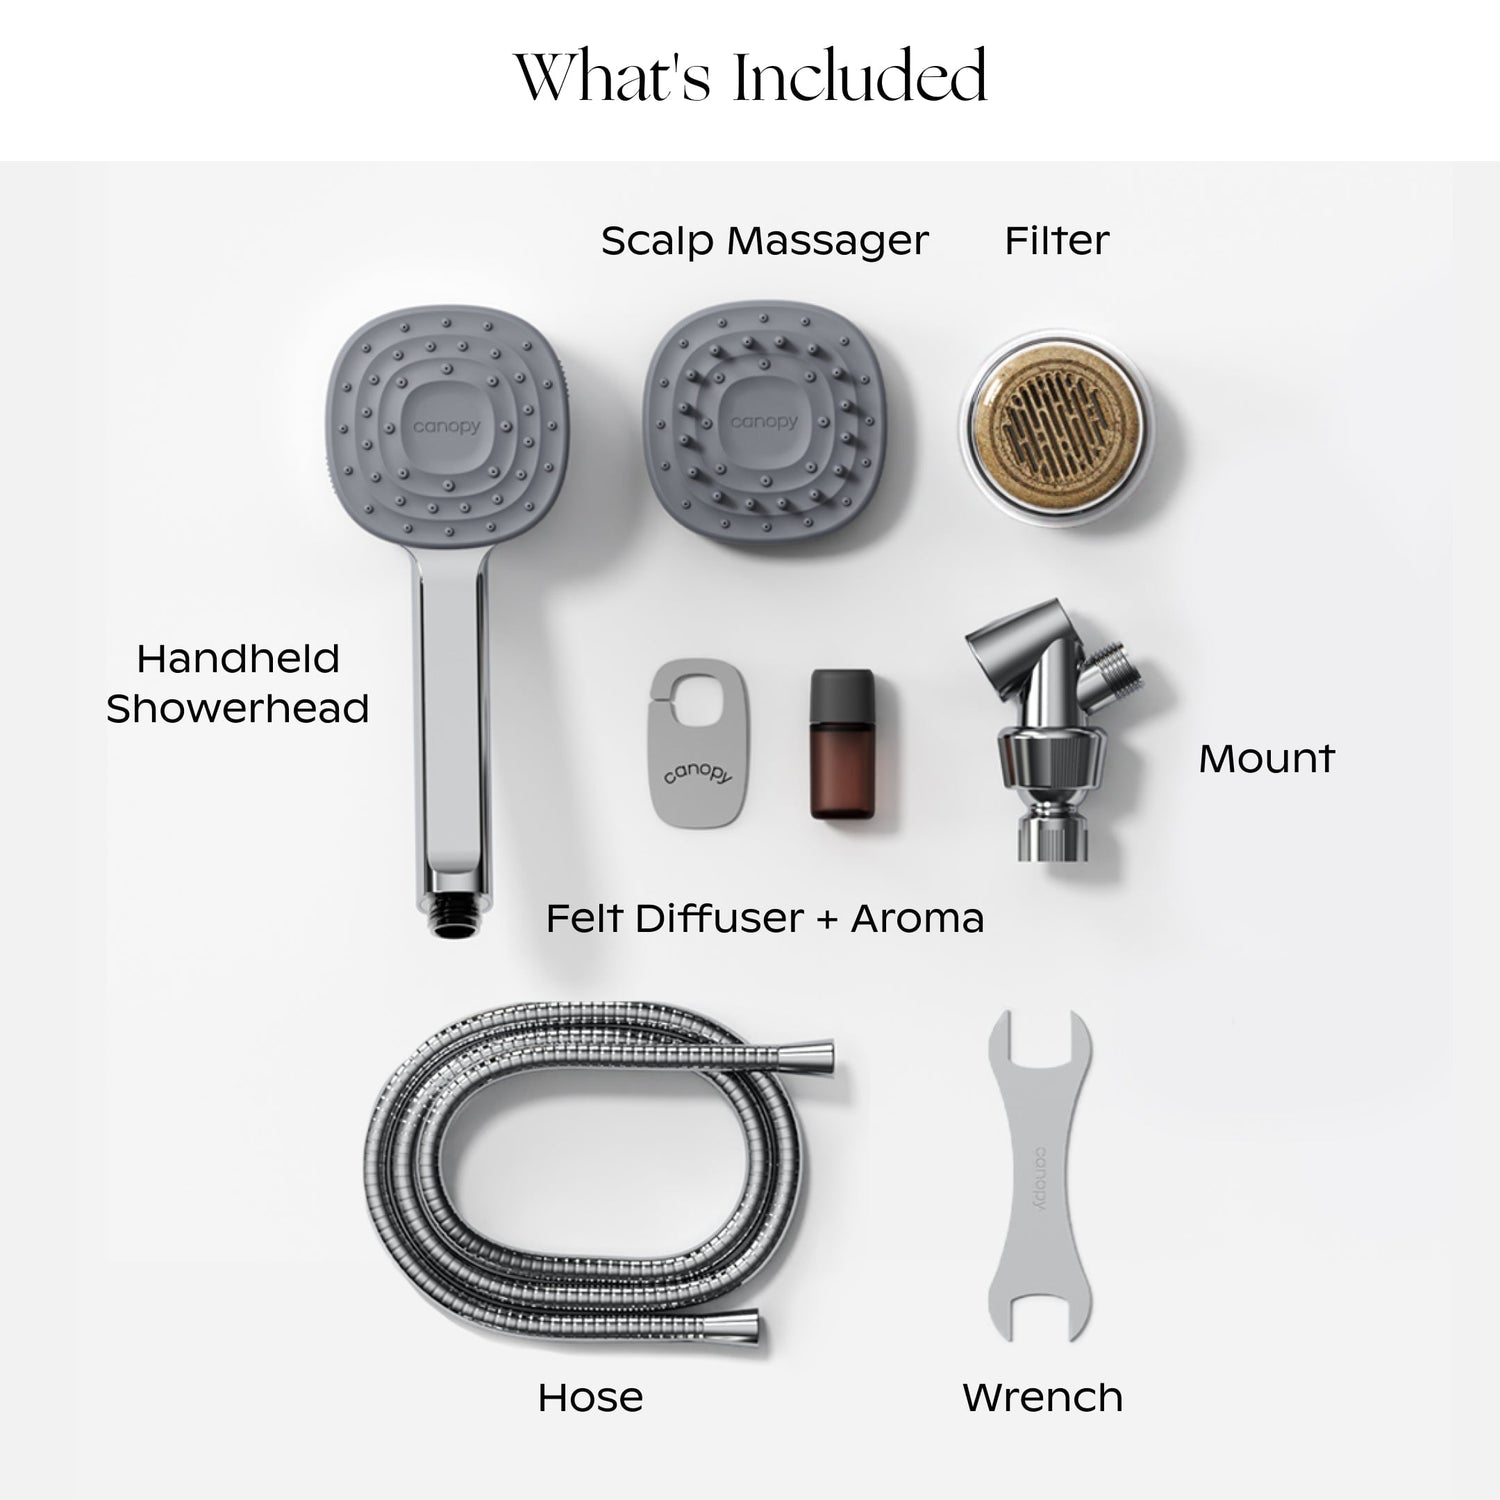 Handheld Filtered Showerhead | Lifestyle,  What's Included